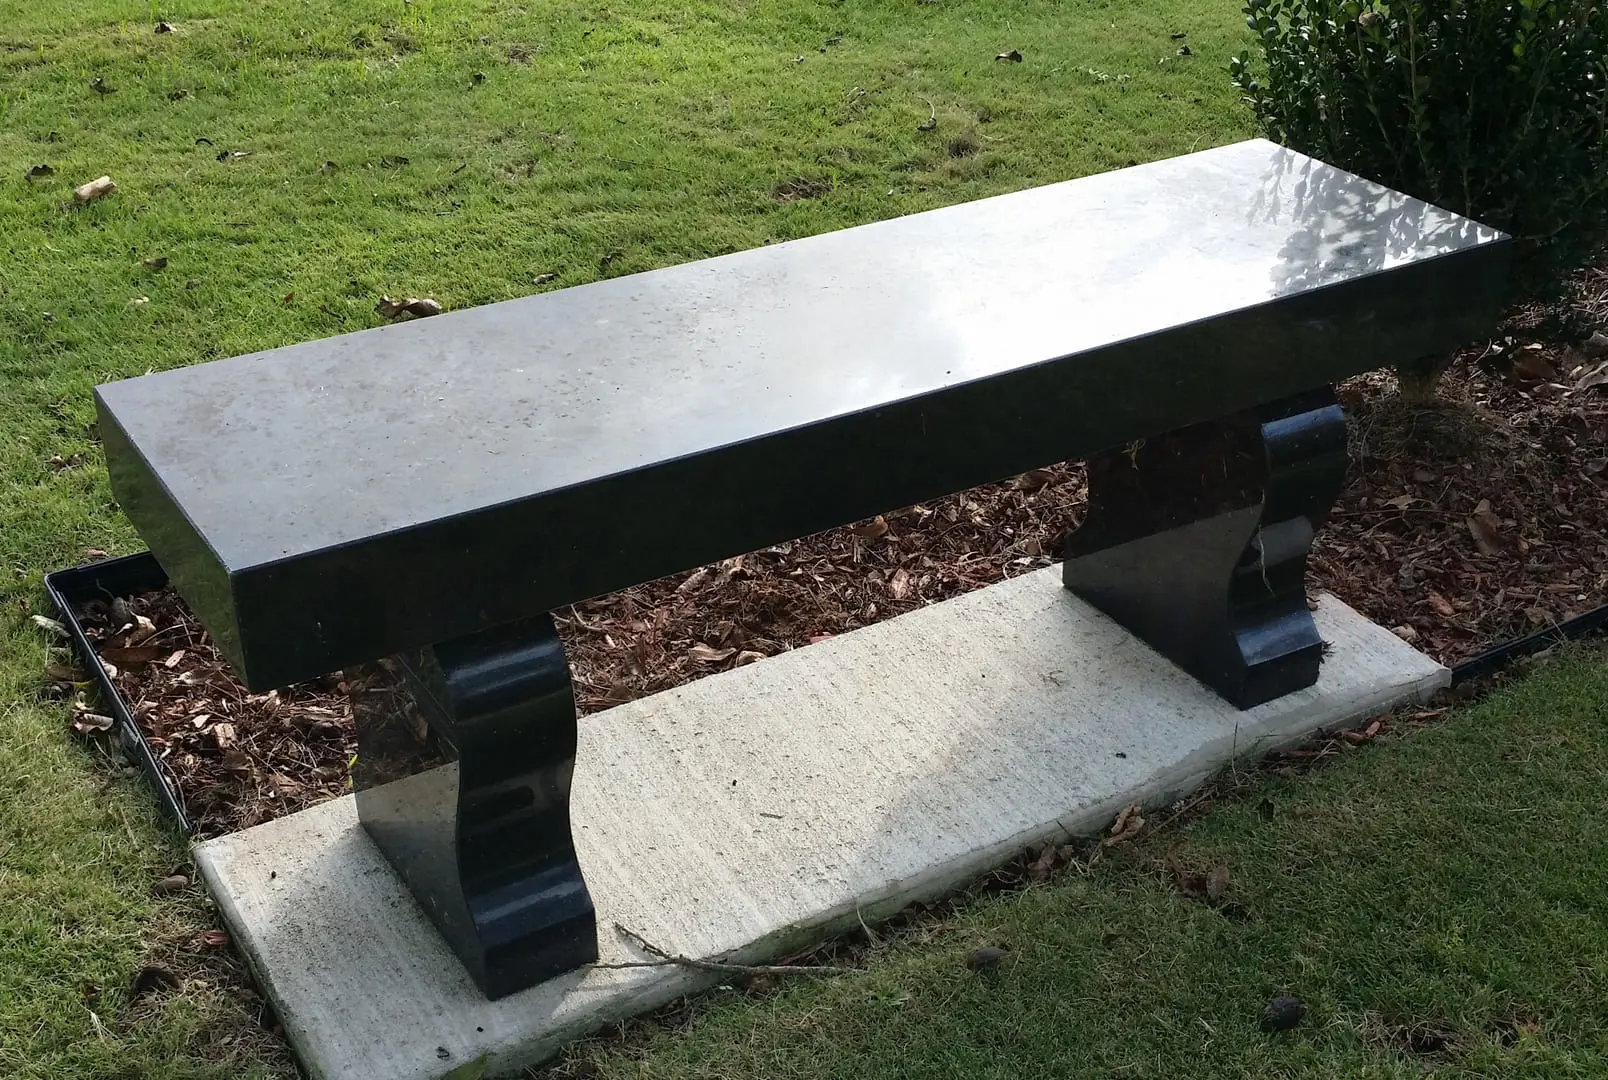 A beautiful crafted bench made out of black marble